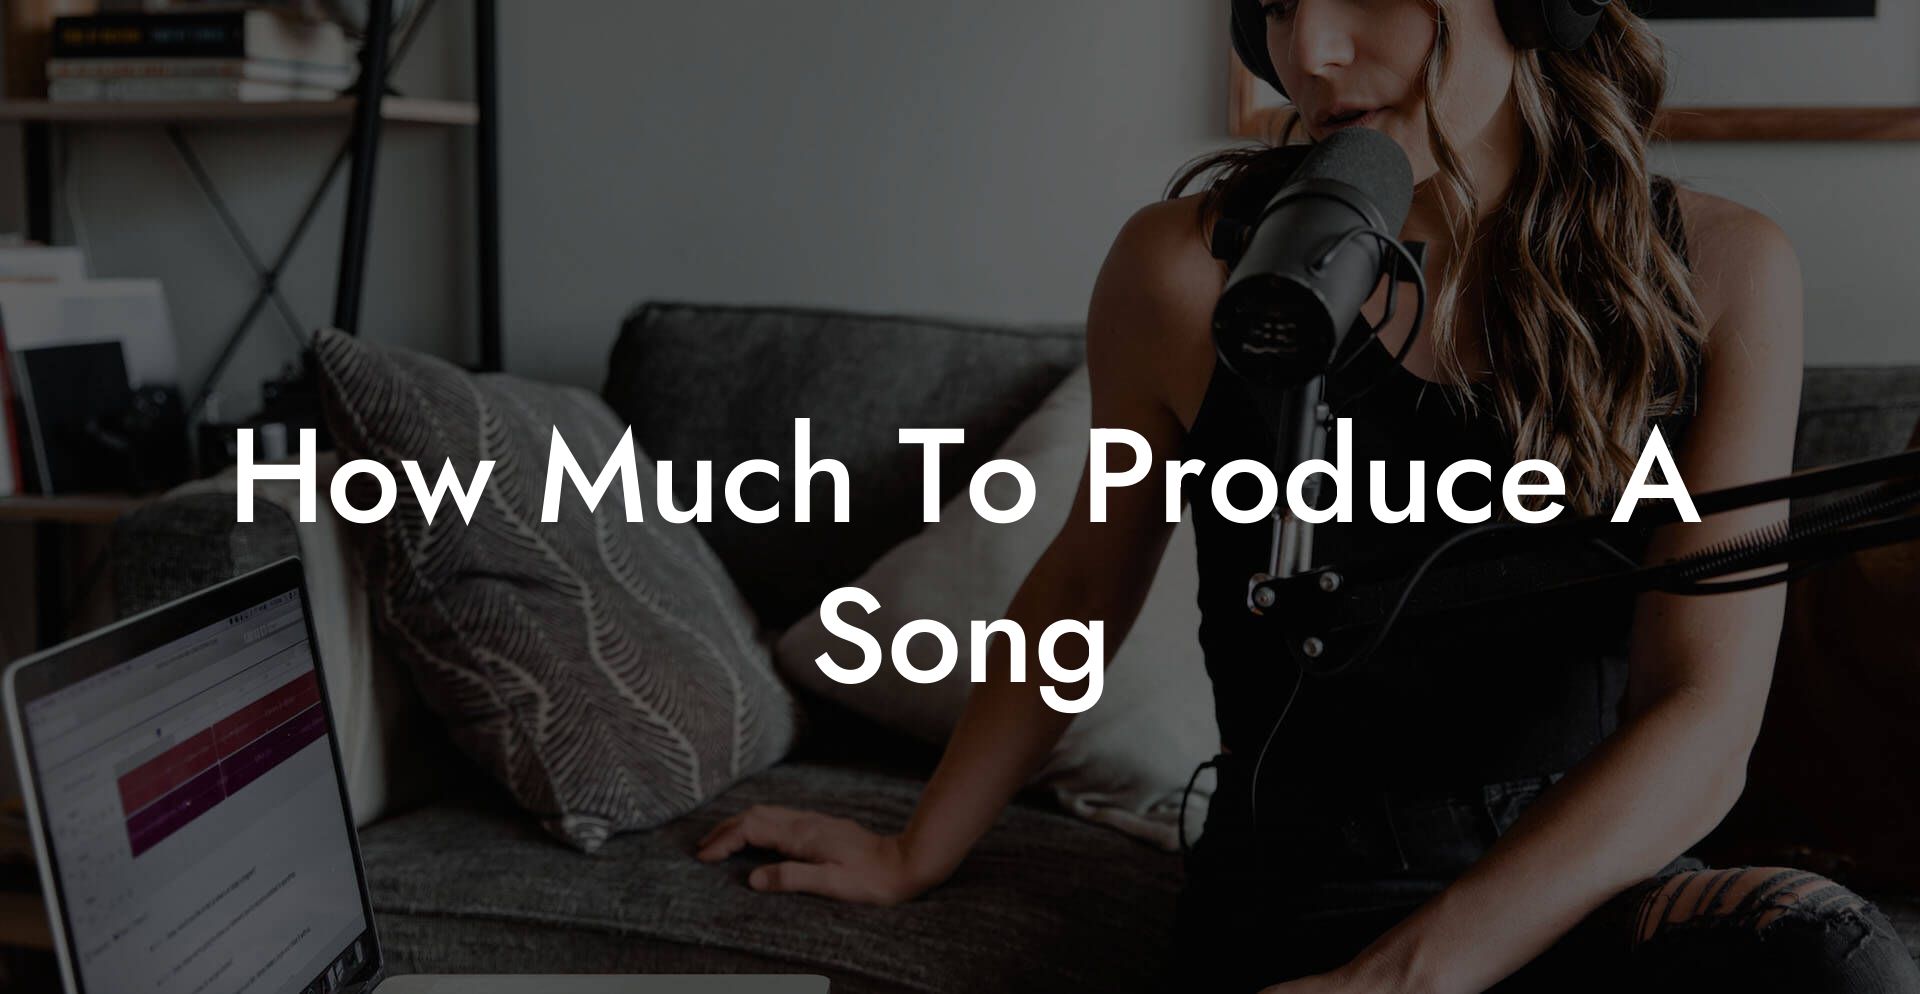 how much to produce a song lyric assistant